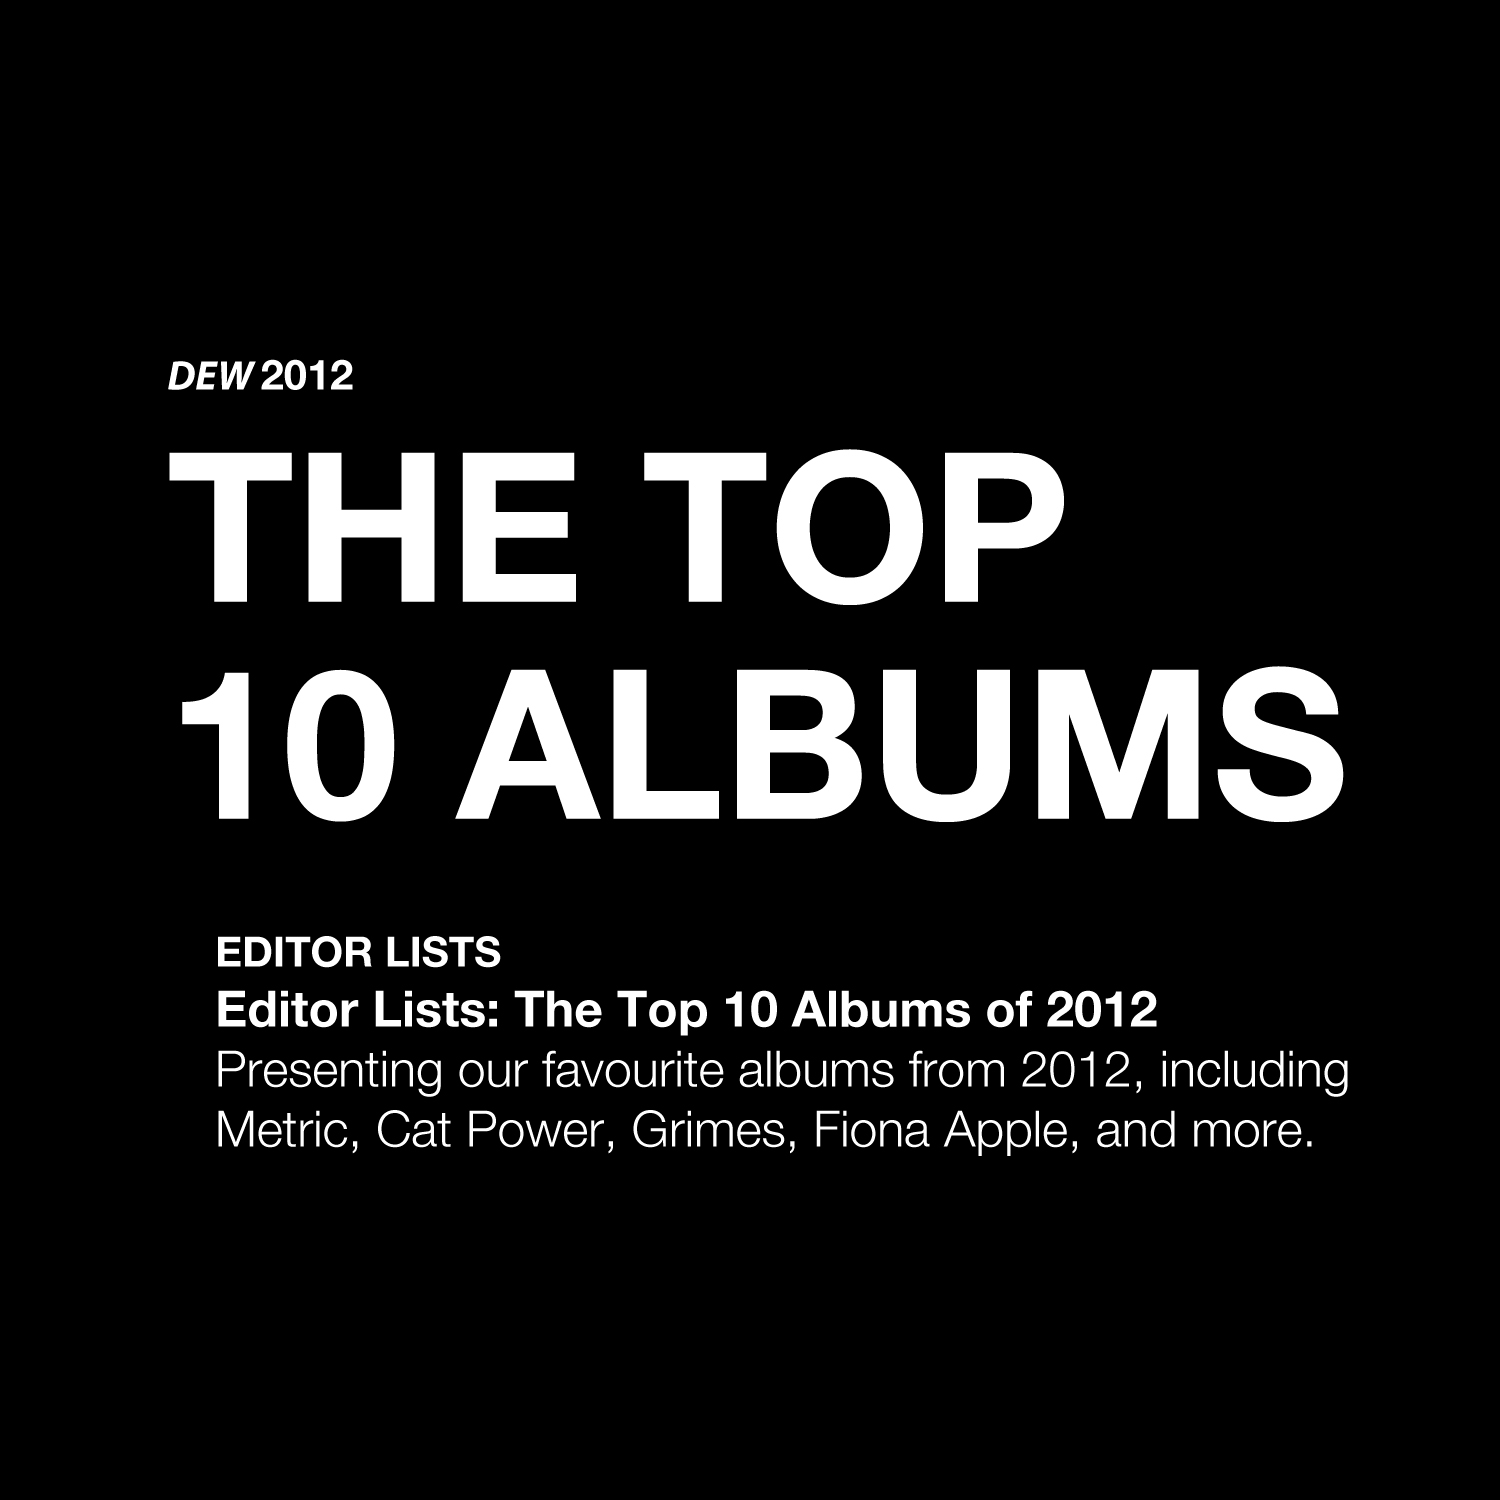 Top 10 Albums of 2012